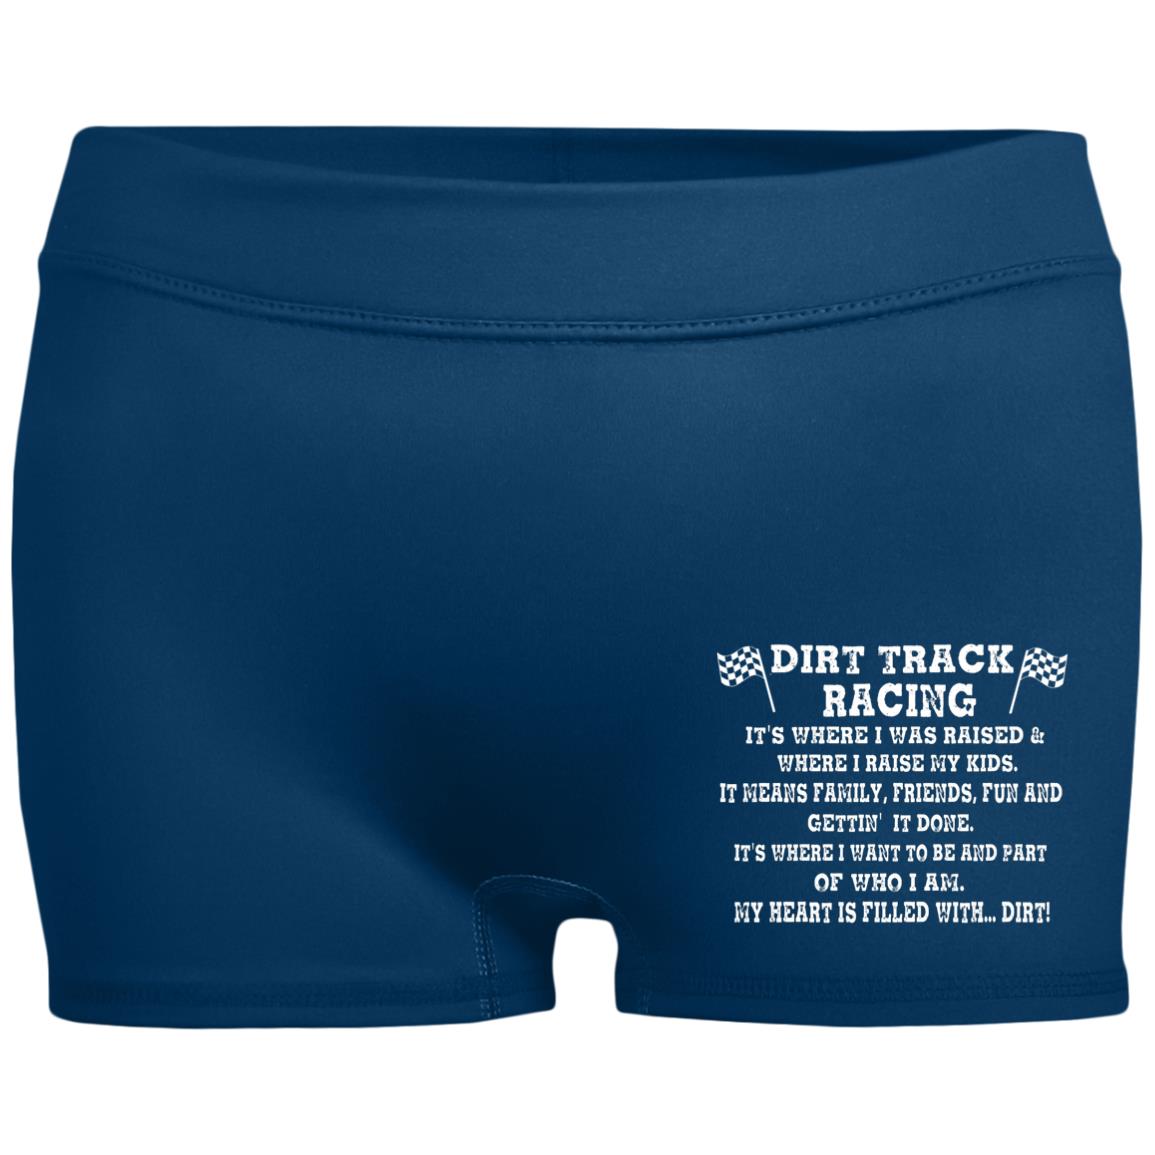 Dirt Track Racing It's Where I Was Raised Ladies' Fitted Moisture-Wicking 2.5 inch Inseam Shorts